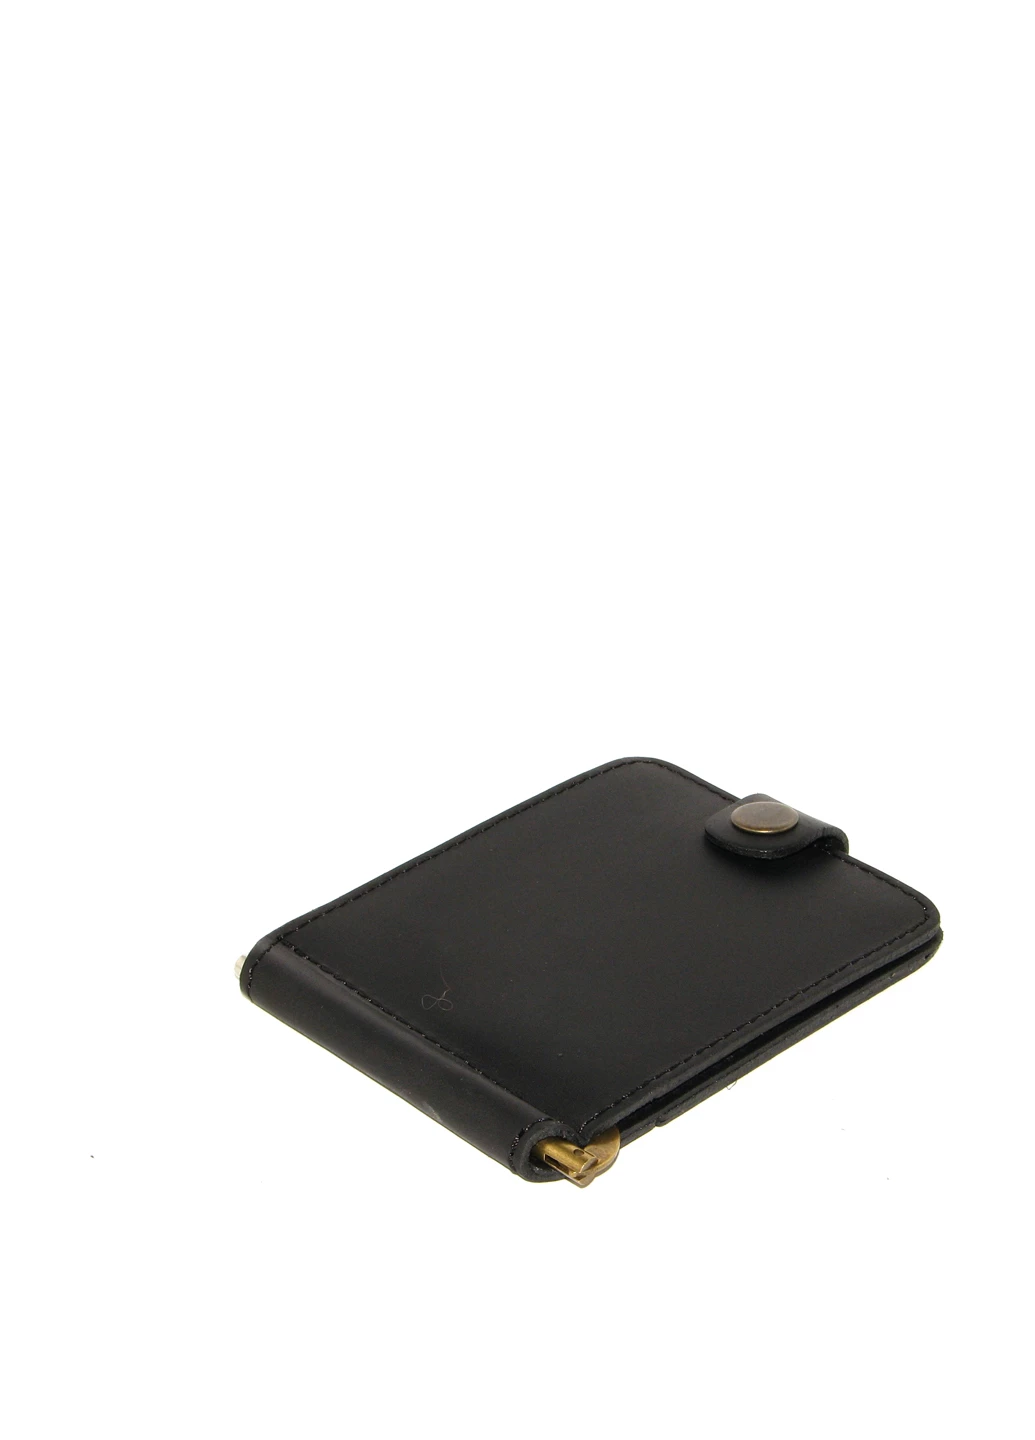 Money clip DNK Leather with small pocket black